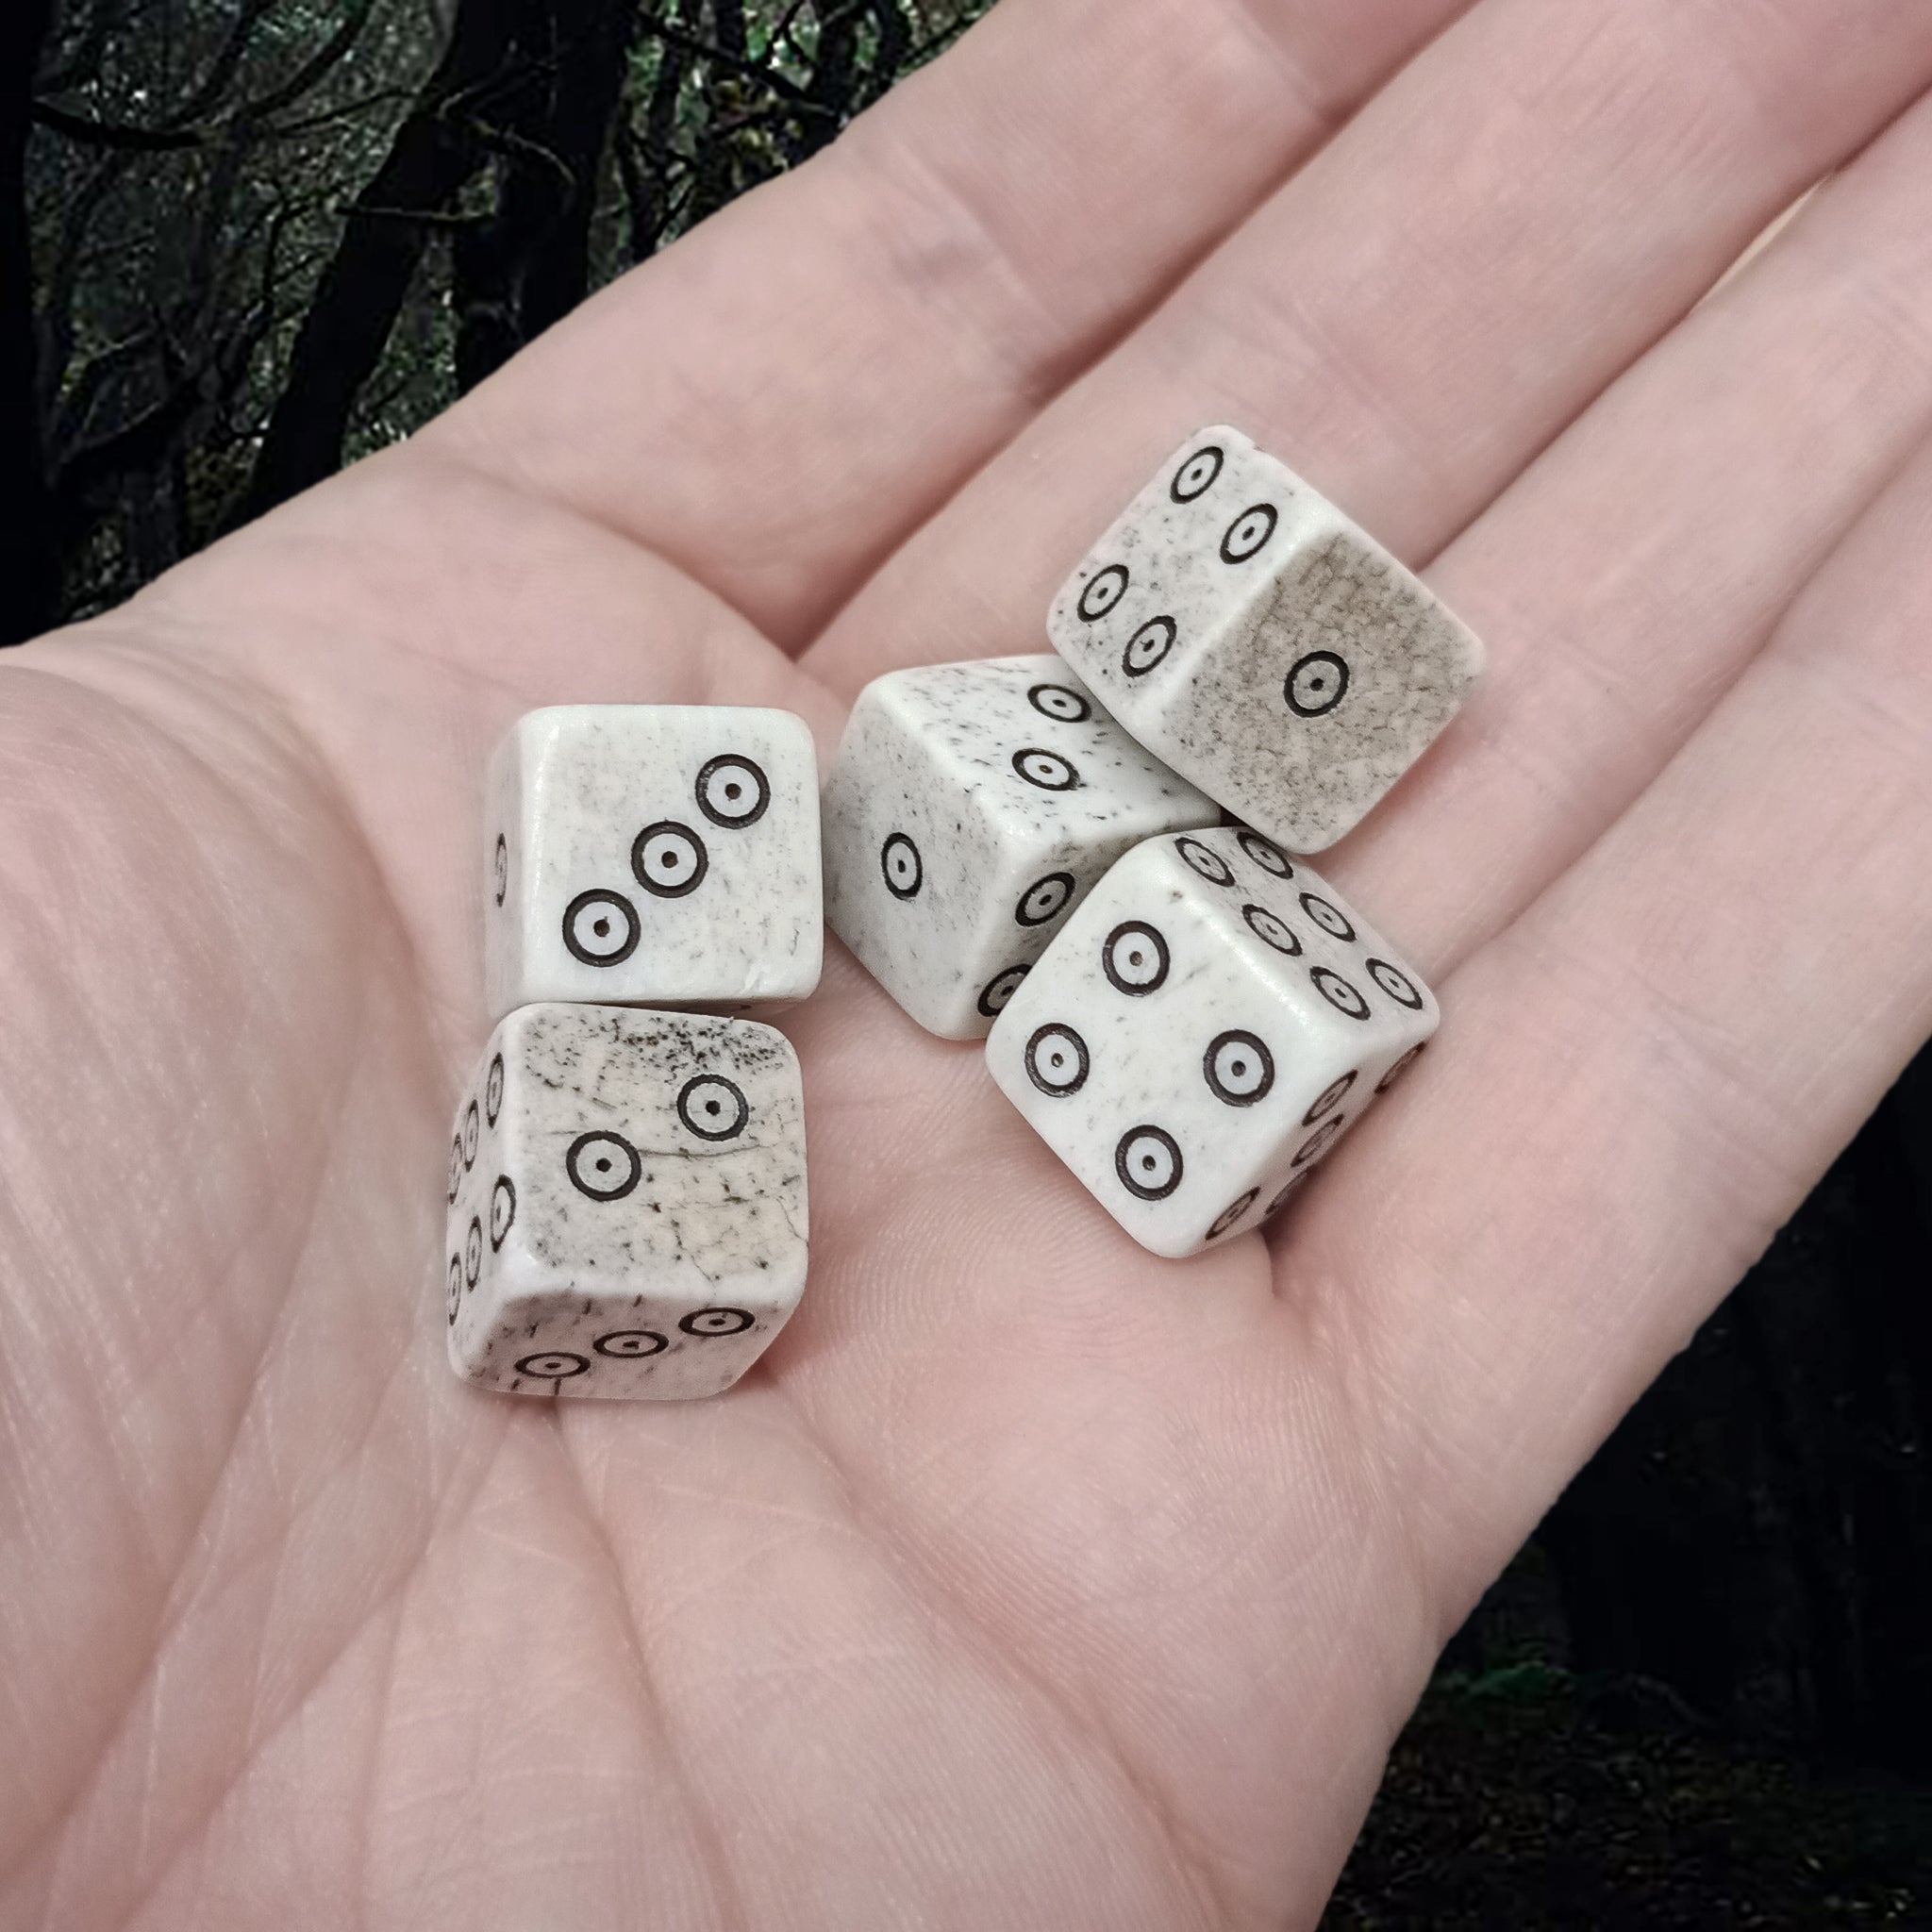 Large Size Cow Bone Dice Replicas with Hand-Carved Dot & Ring Spots on Hand x 5